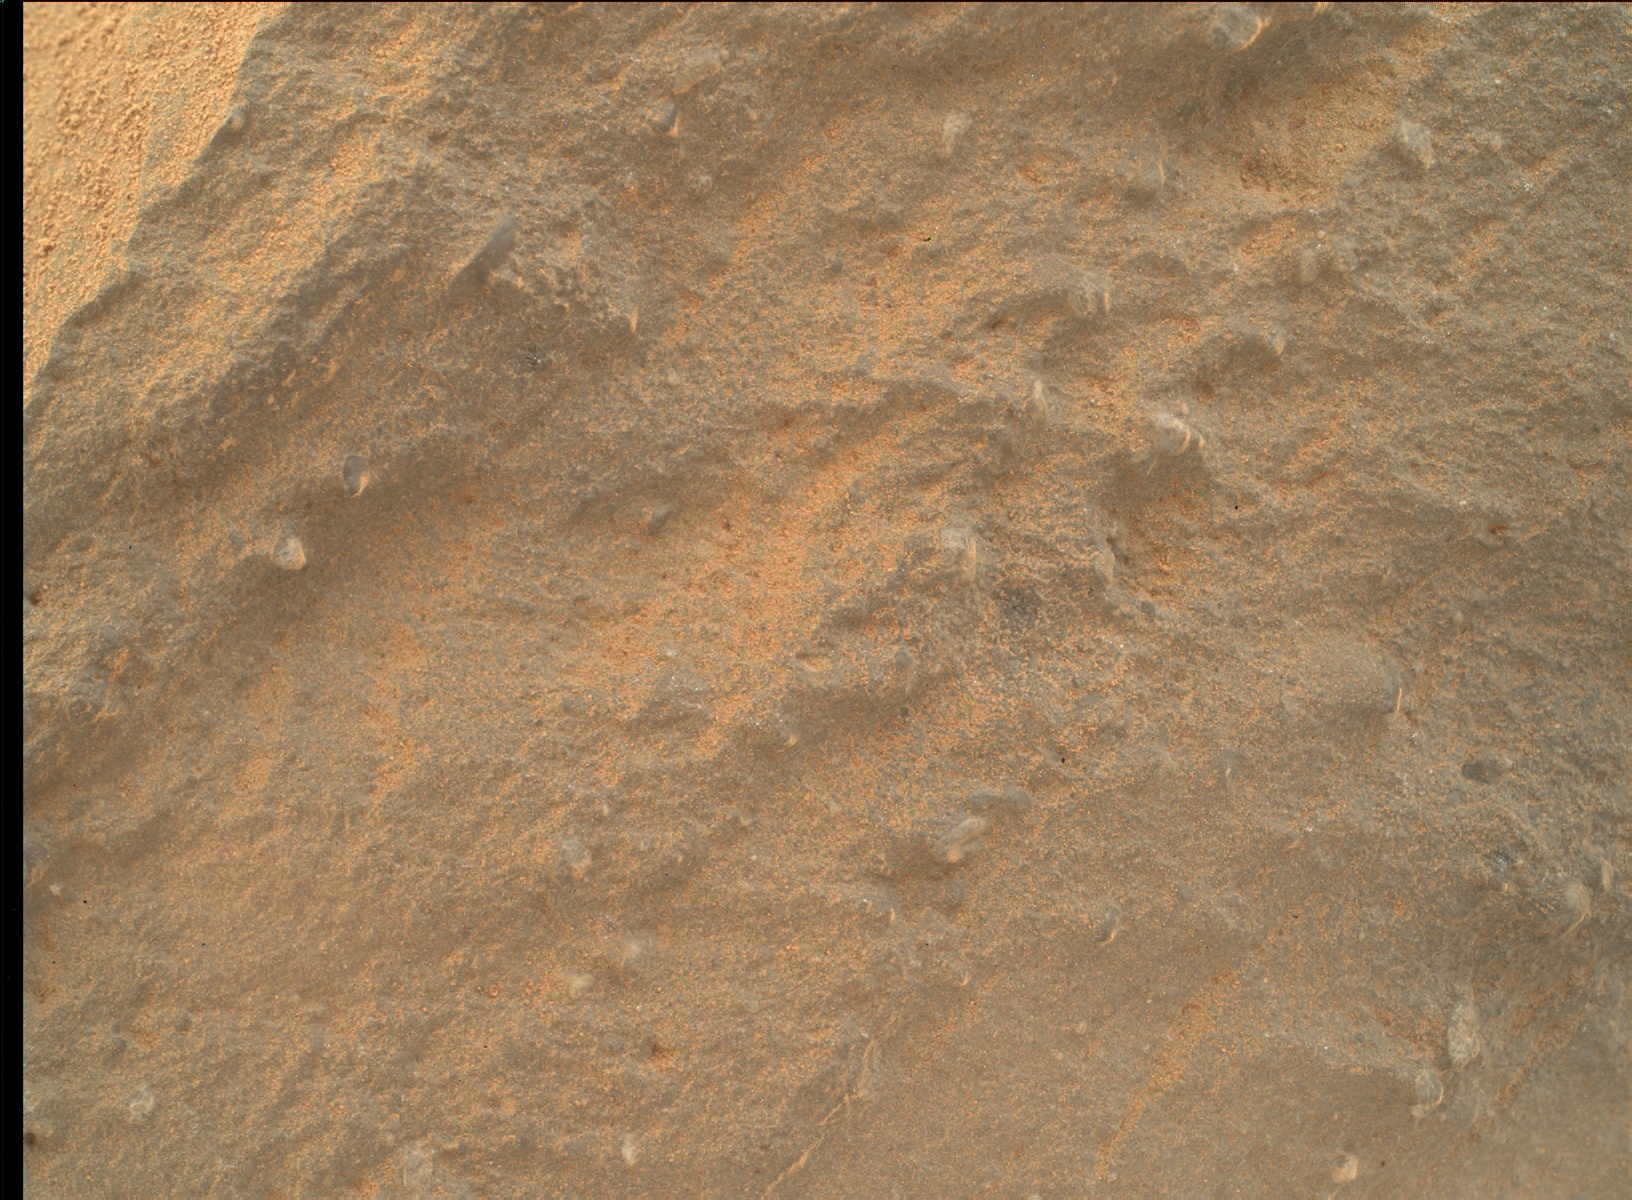 Nasa's Mars rover Curiosity acquired this image using its Mars Hand Lens Imager (MAHLI) on Sol 583